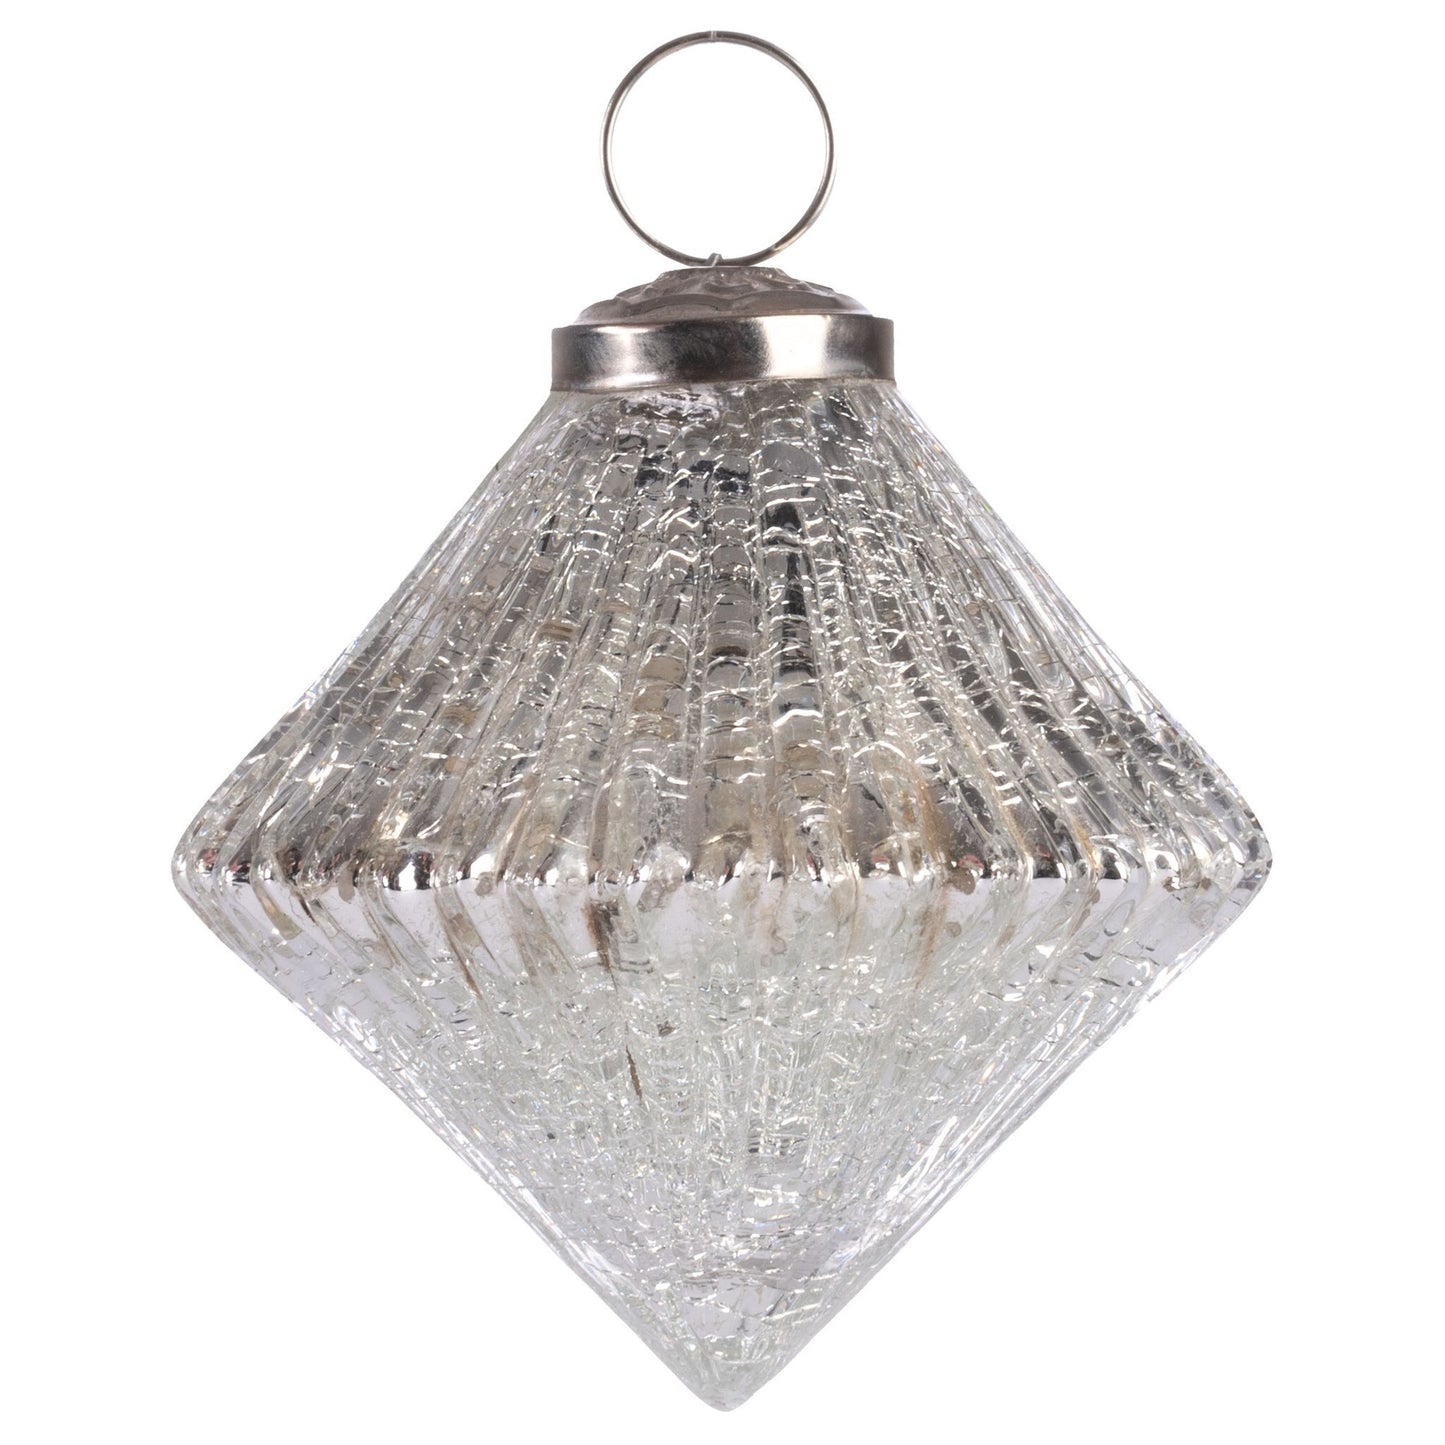 Fluted Silver Mercury Glass Ornament